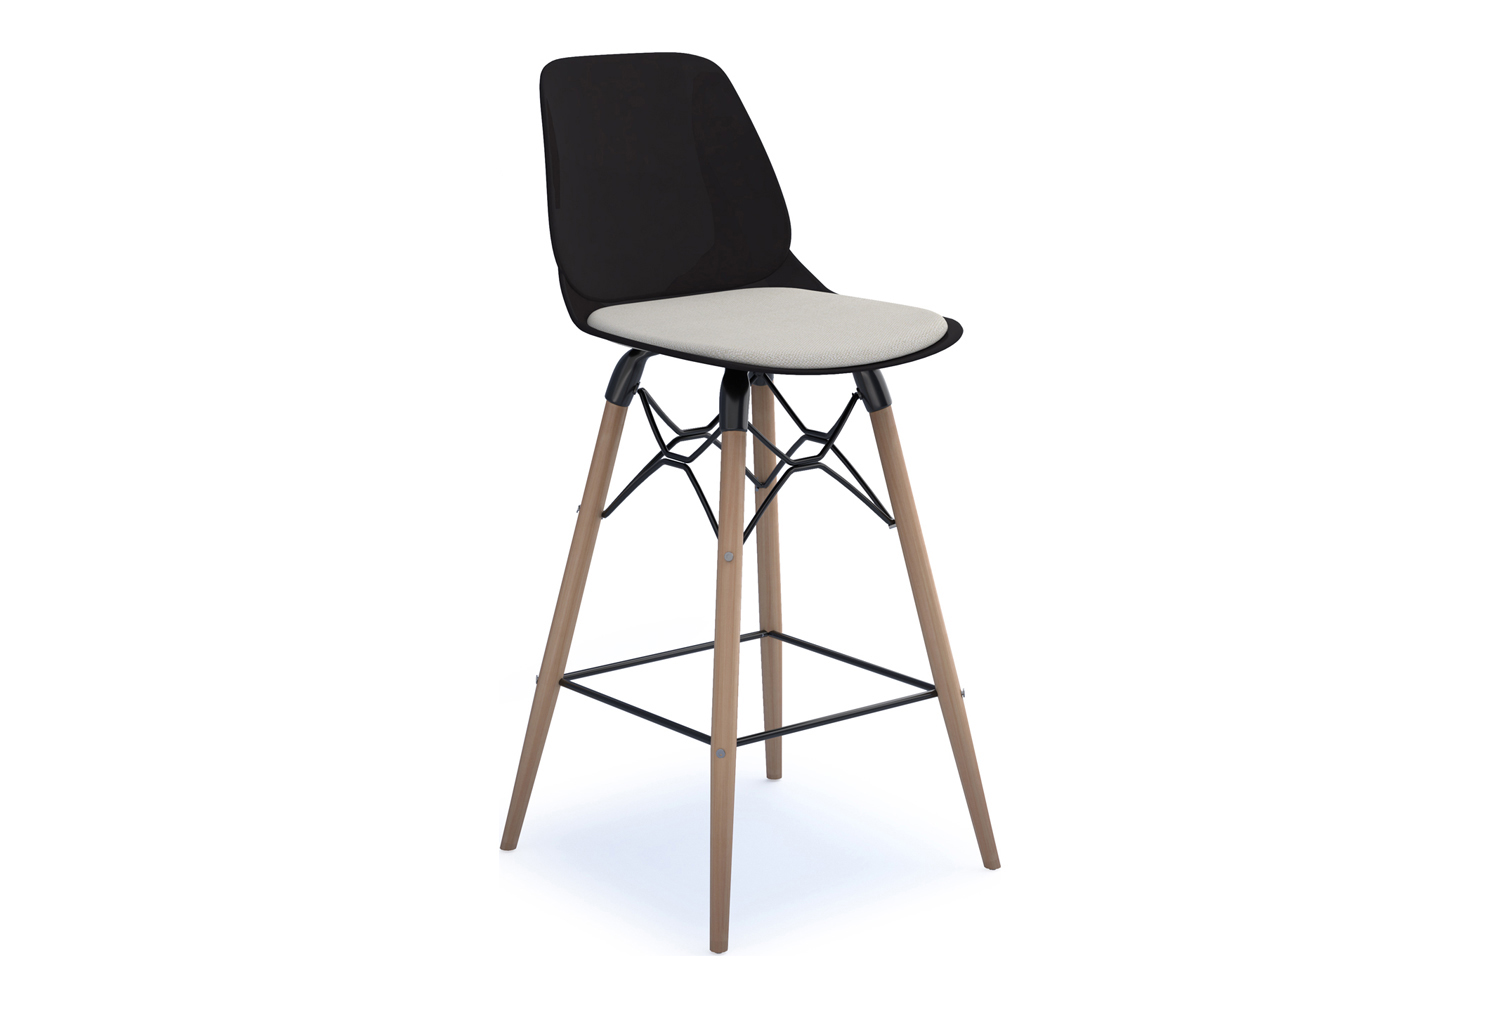 Sylvia Wooden Frame Stool With Seat Pad, Black Frame, Blizzard, Fully Installed